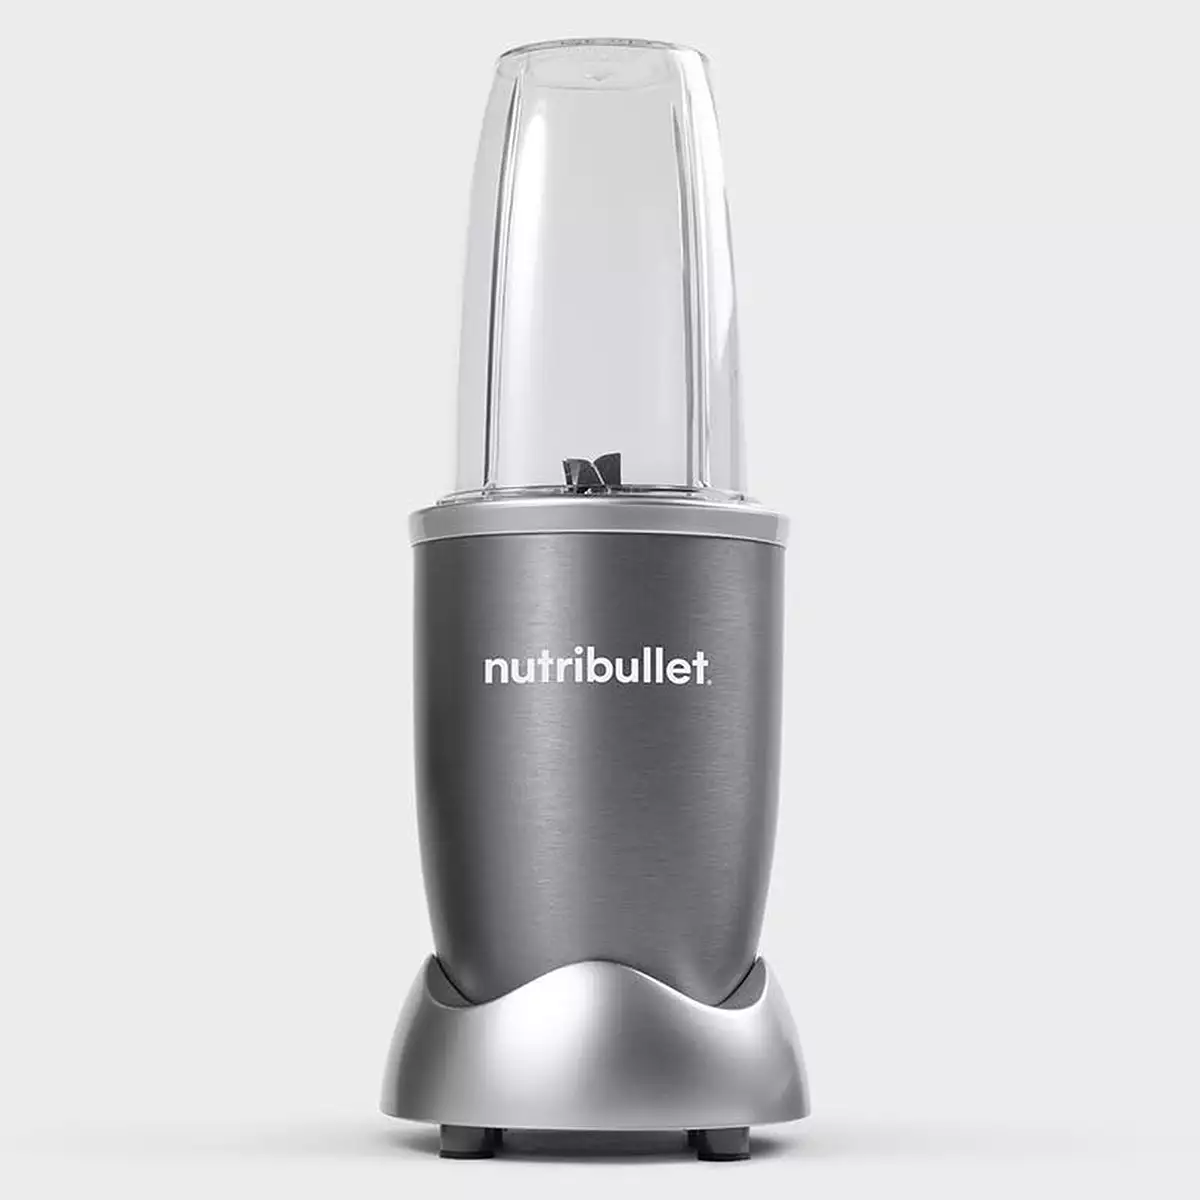 Top 21 NutriBullet After Christmas Sales 2022 & Deals – What To Expect